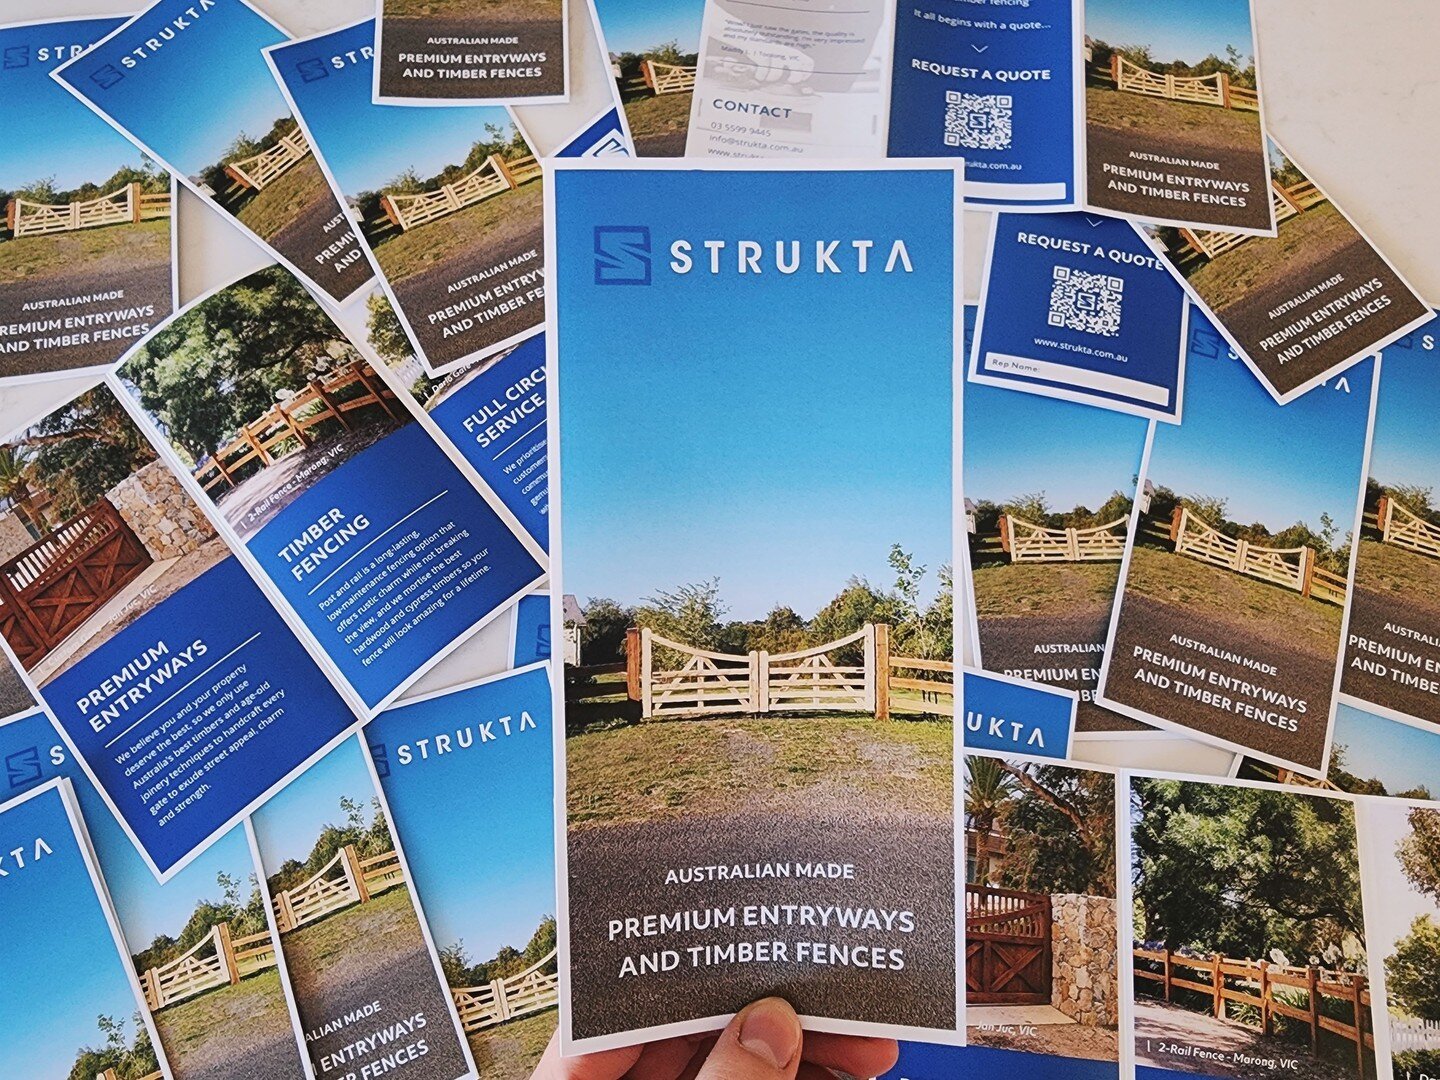 Our new flyer, hot off the press 💫 know of someone that needs Strukta in their life? Let us know and we'll send you some to pass on! 💌

www.strukta.com.au�

#strukta #postandrail #timberfencing #timberfence #ruralfence #lifestyleproperty #timbergat